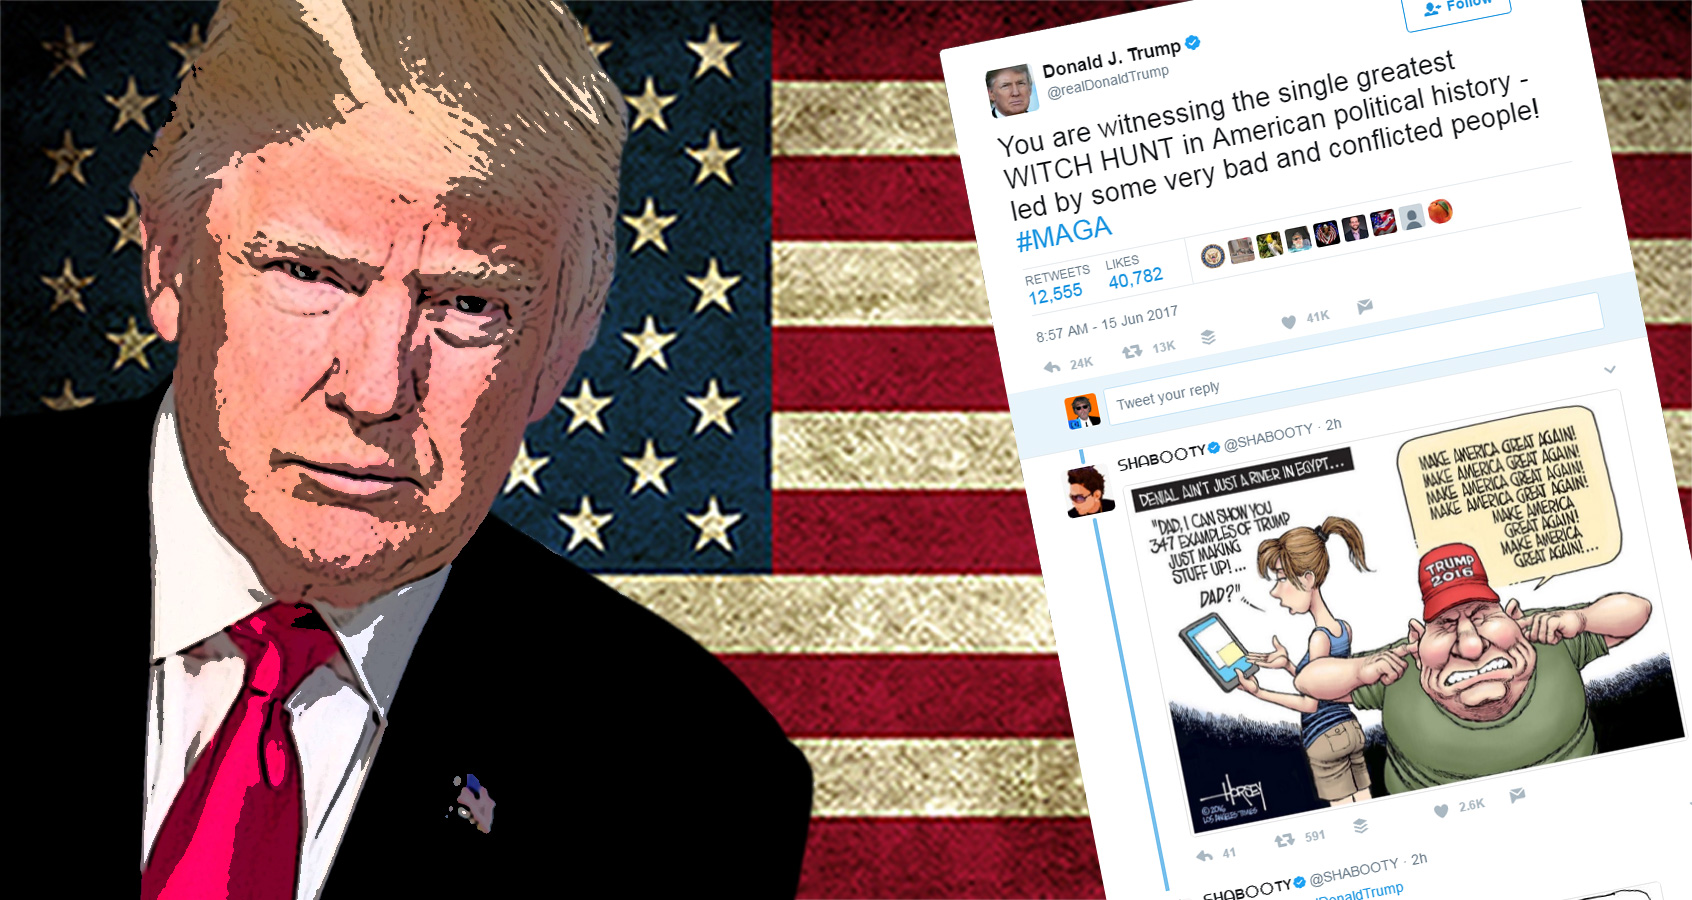 Trump Mercilessly Mocked After He Embarrasses Himself Again With Early Morning Twitter Tantrum